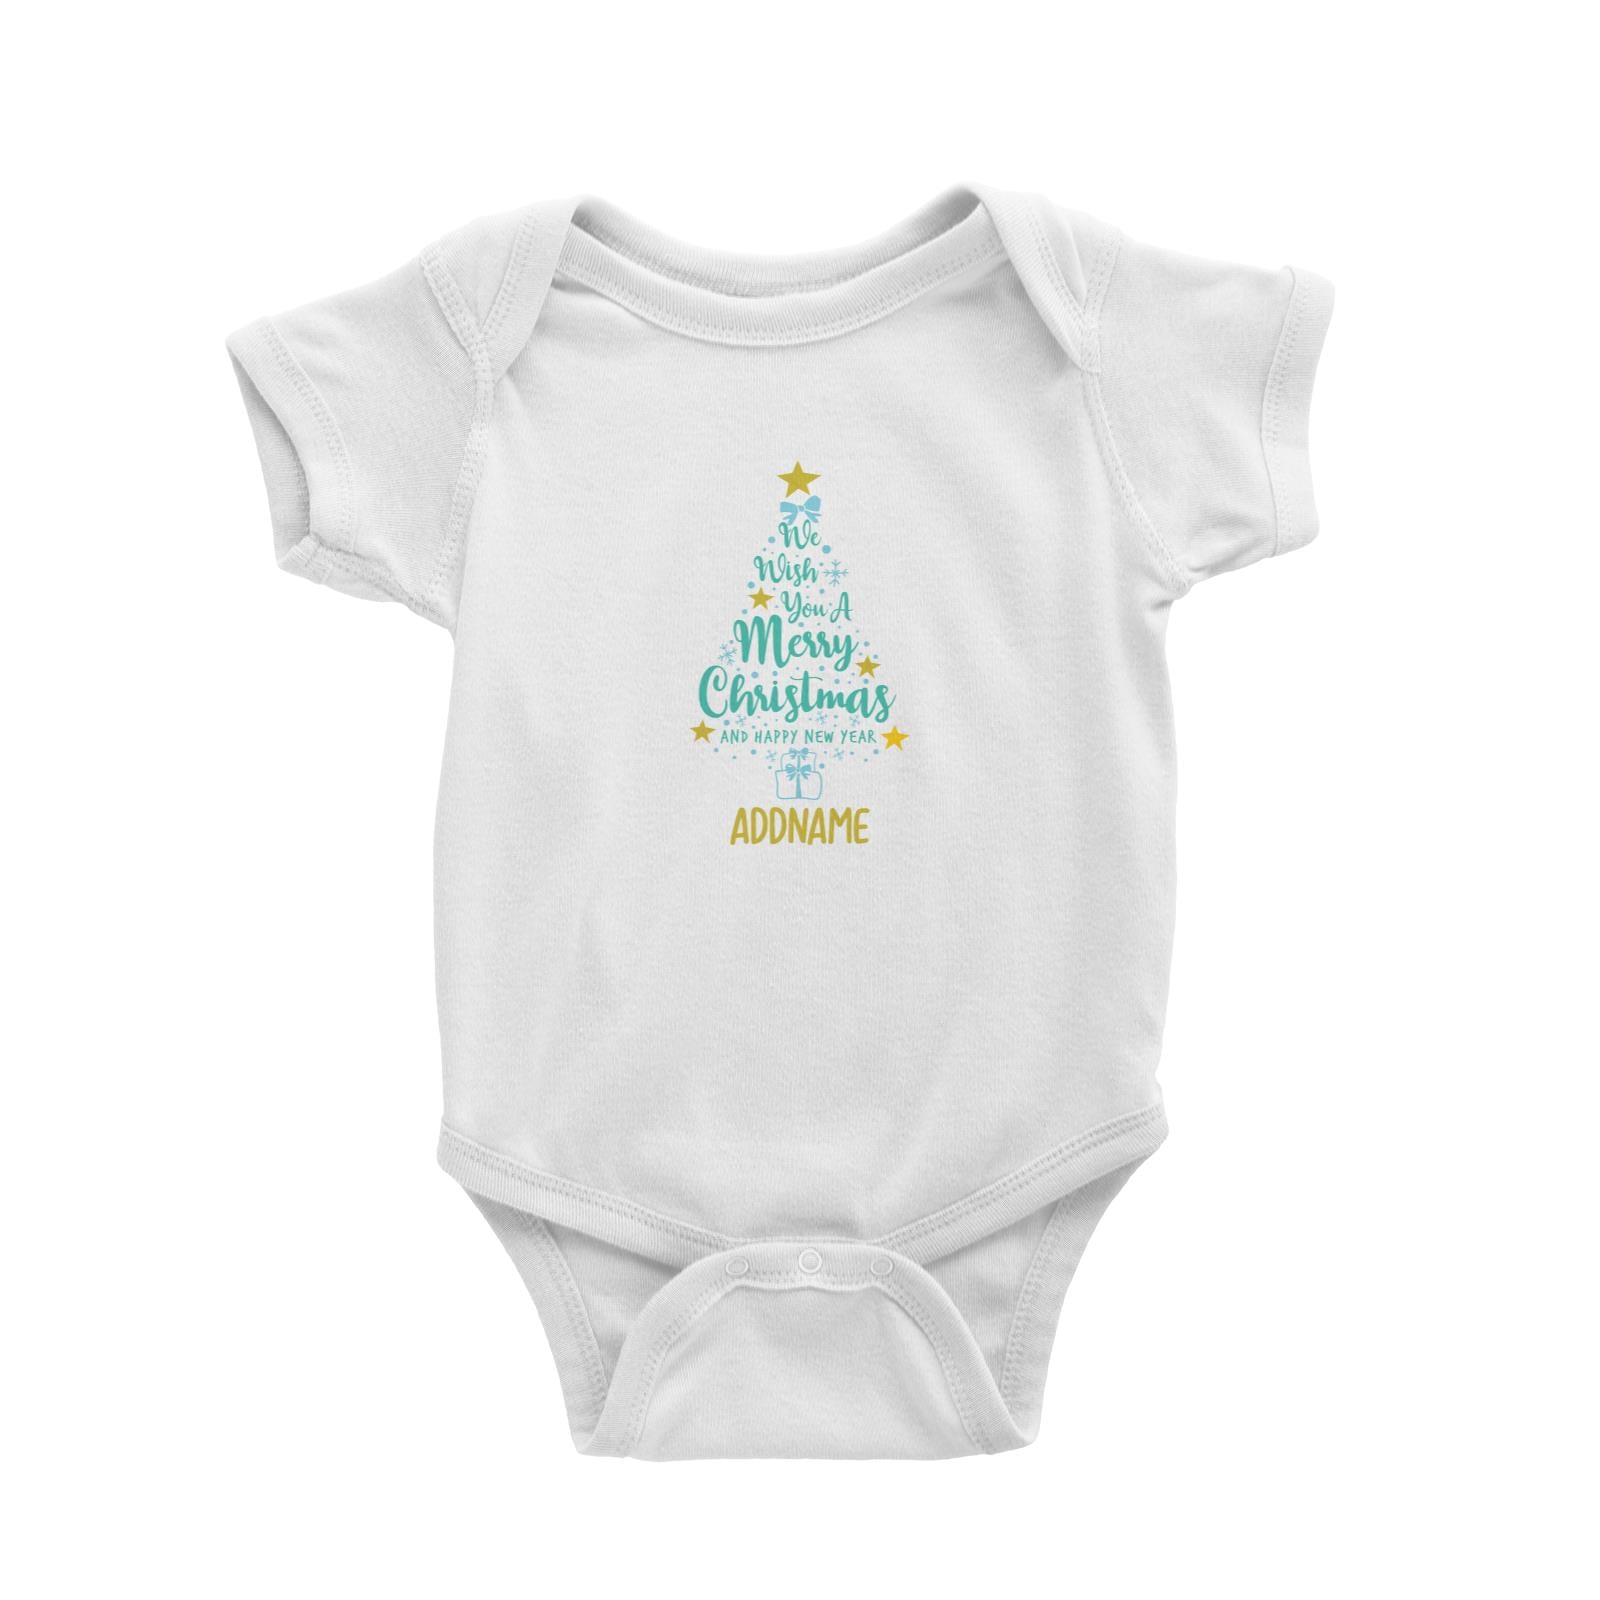 Xmas We Wish You A Merry Christmas and A Happy New Year Baby Romper